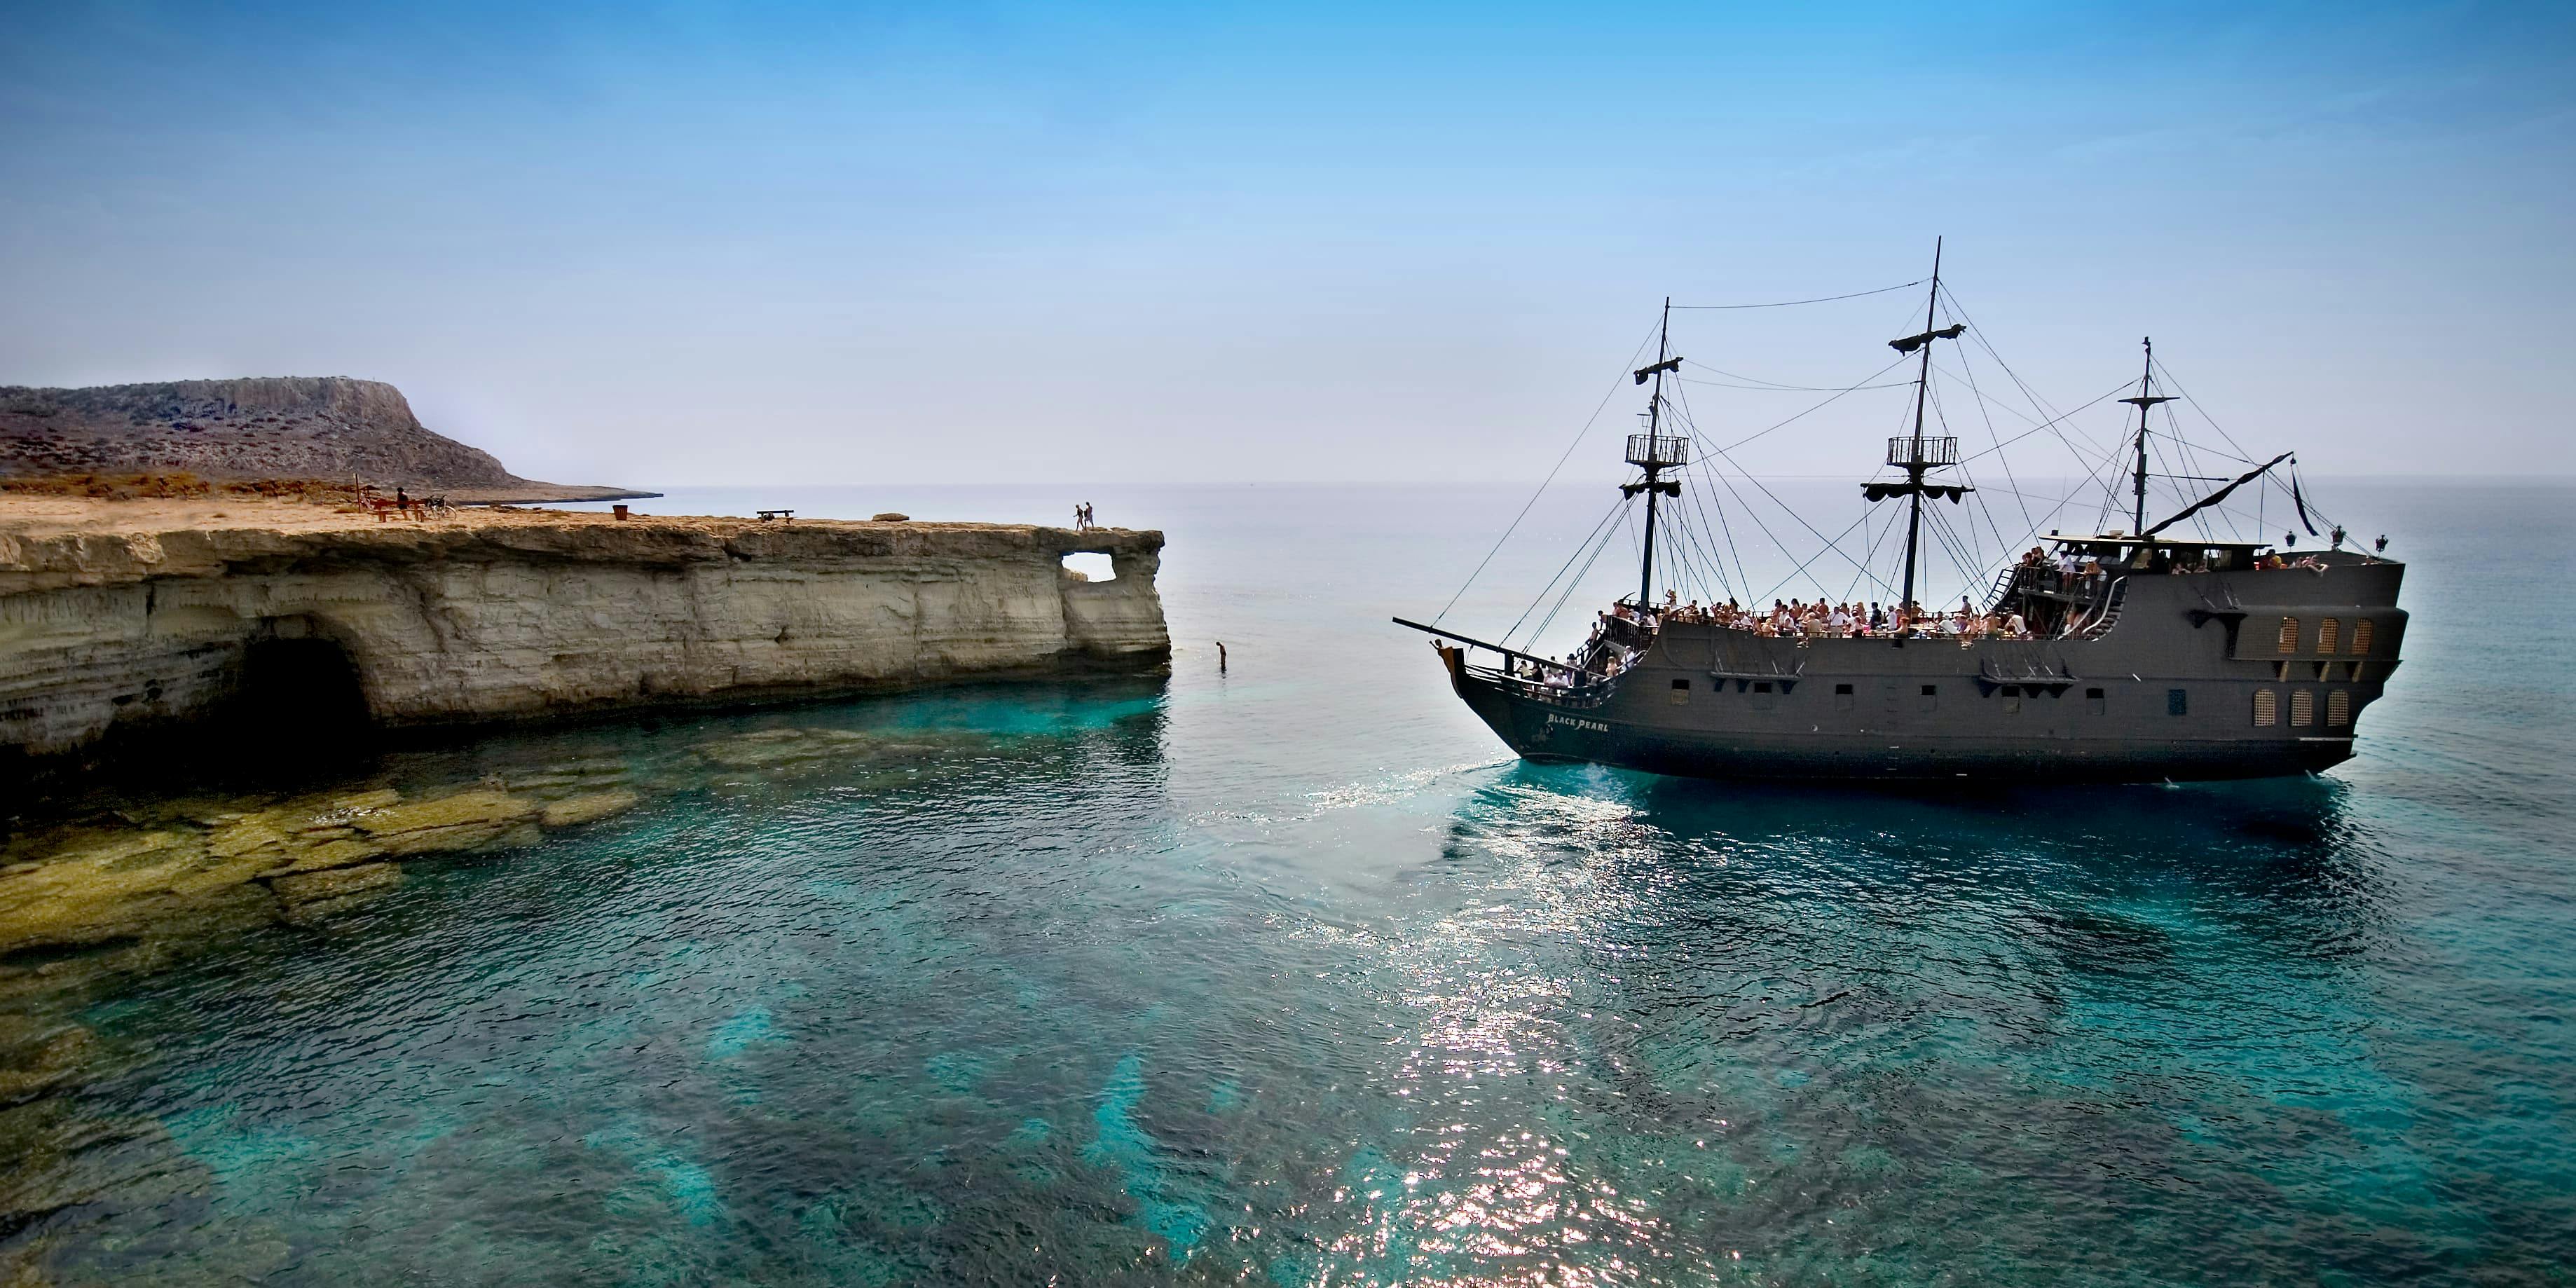 Black Pearl Pirate Cruise Ticket Only